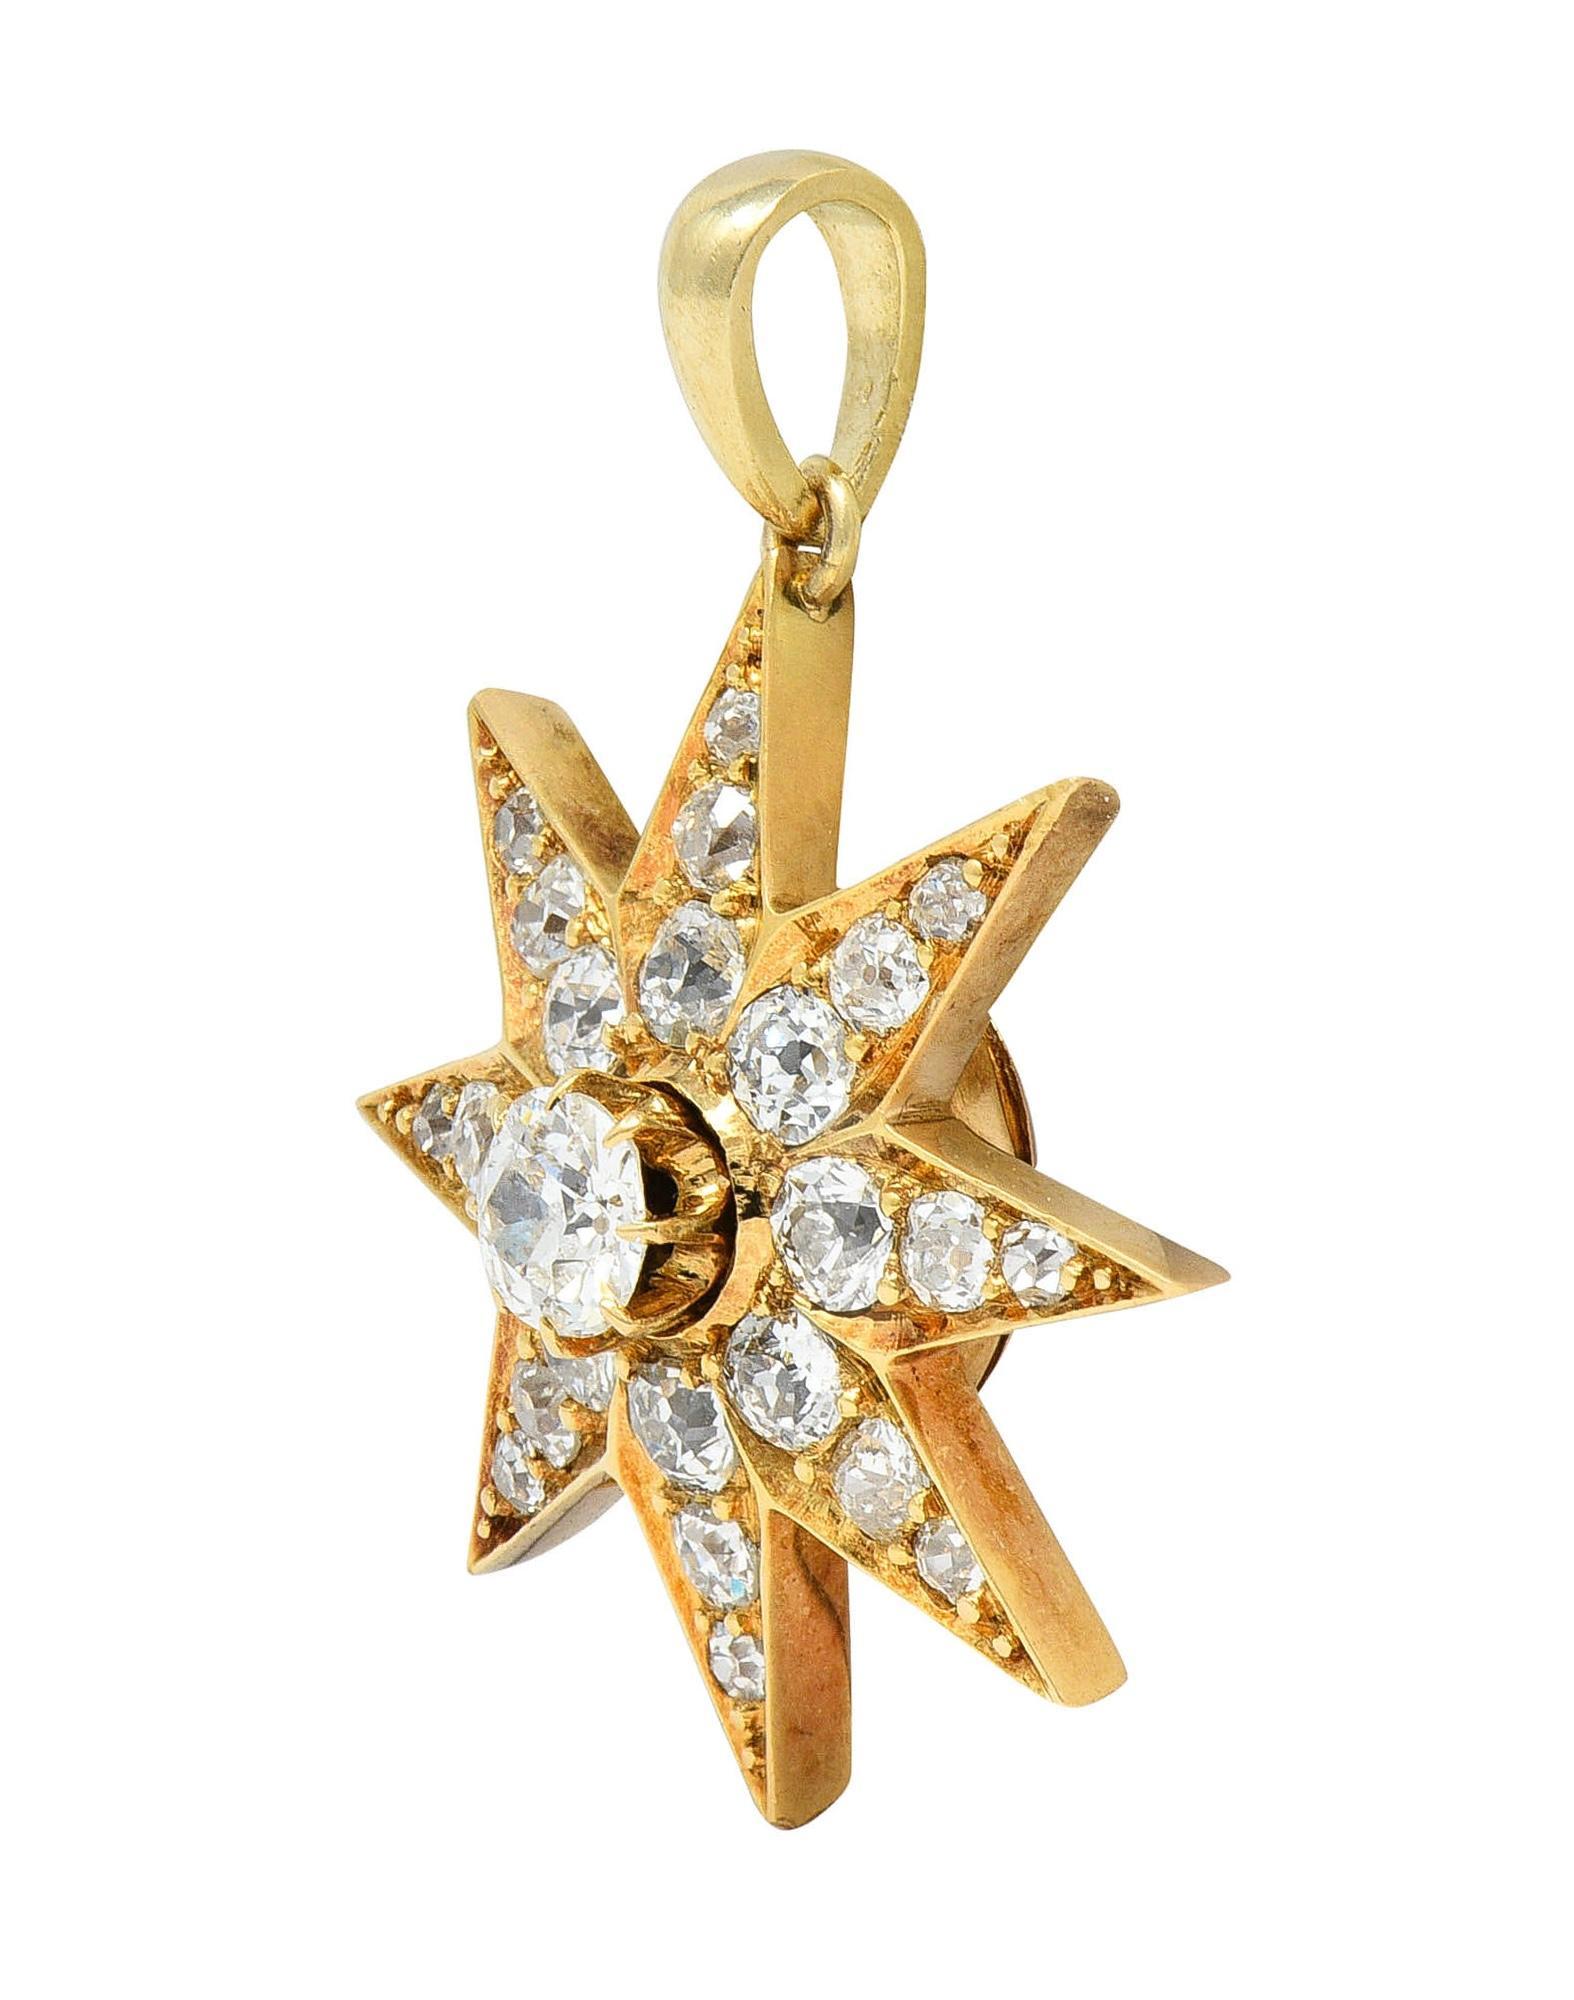 Designed as an eight-point gold starburst motif centering an old European cut diamond 
Prong set and weighing approximately 0.22 carat total - G color with SI1 clarity
With additional diamonds bead set in starburst motif
Weighing approximately 1.00